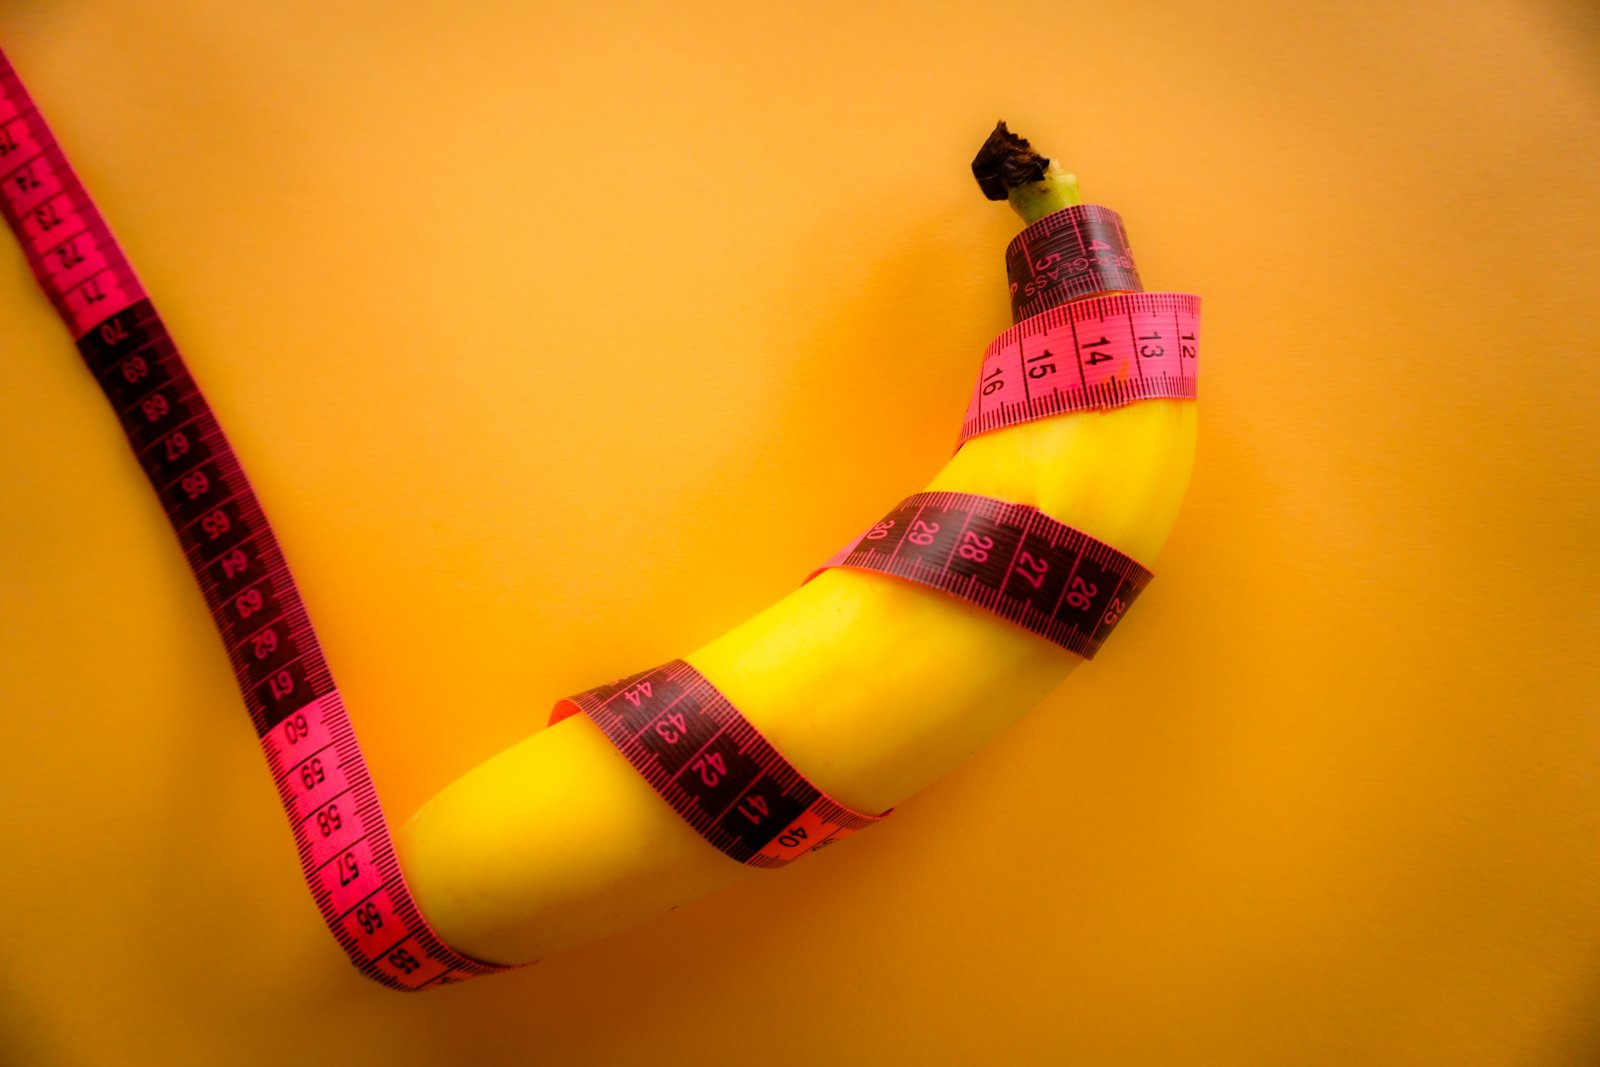 A banana wrapped with a tape measure to suggest measuring a small penis